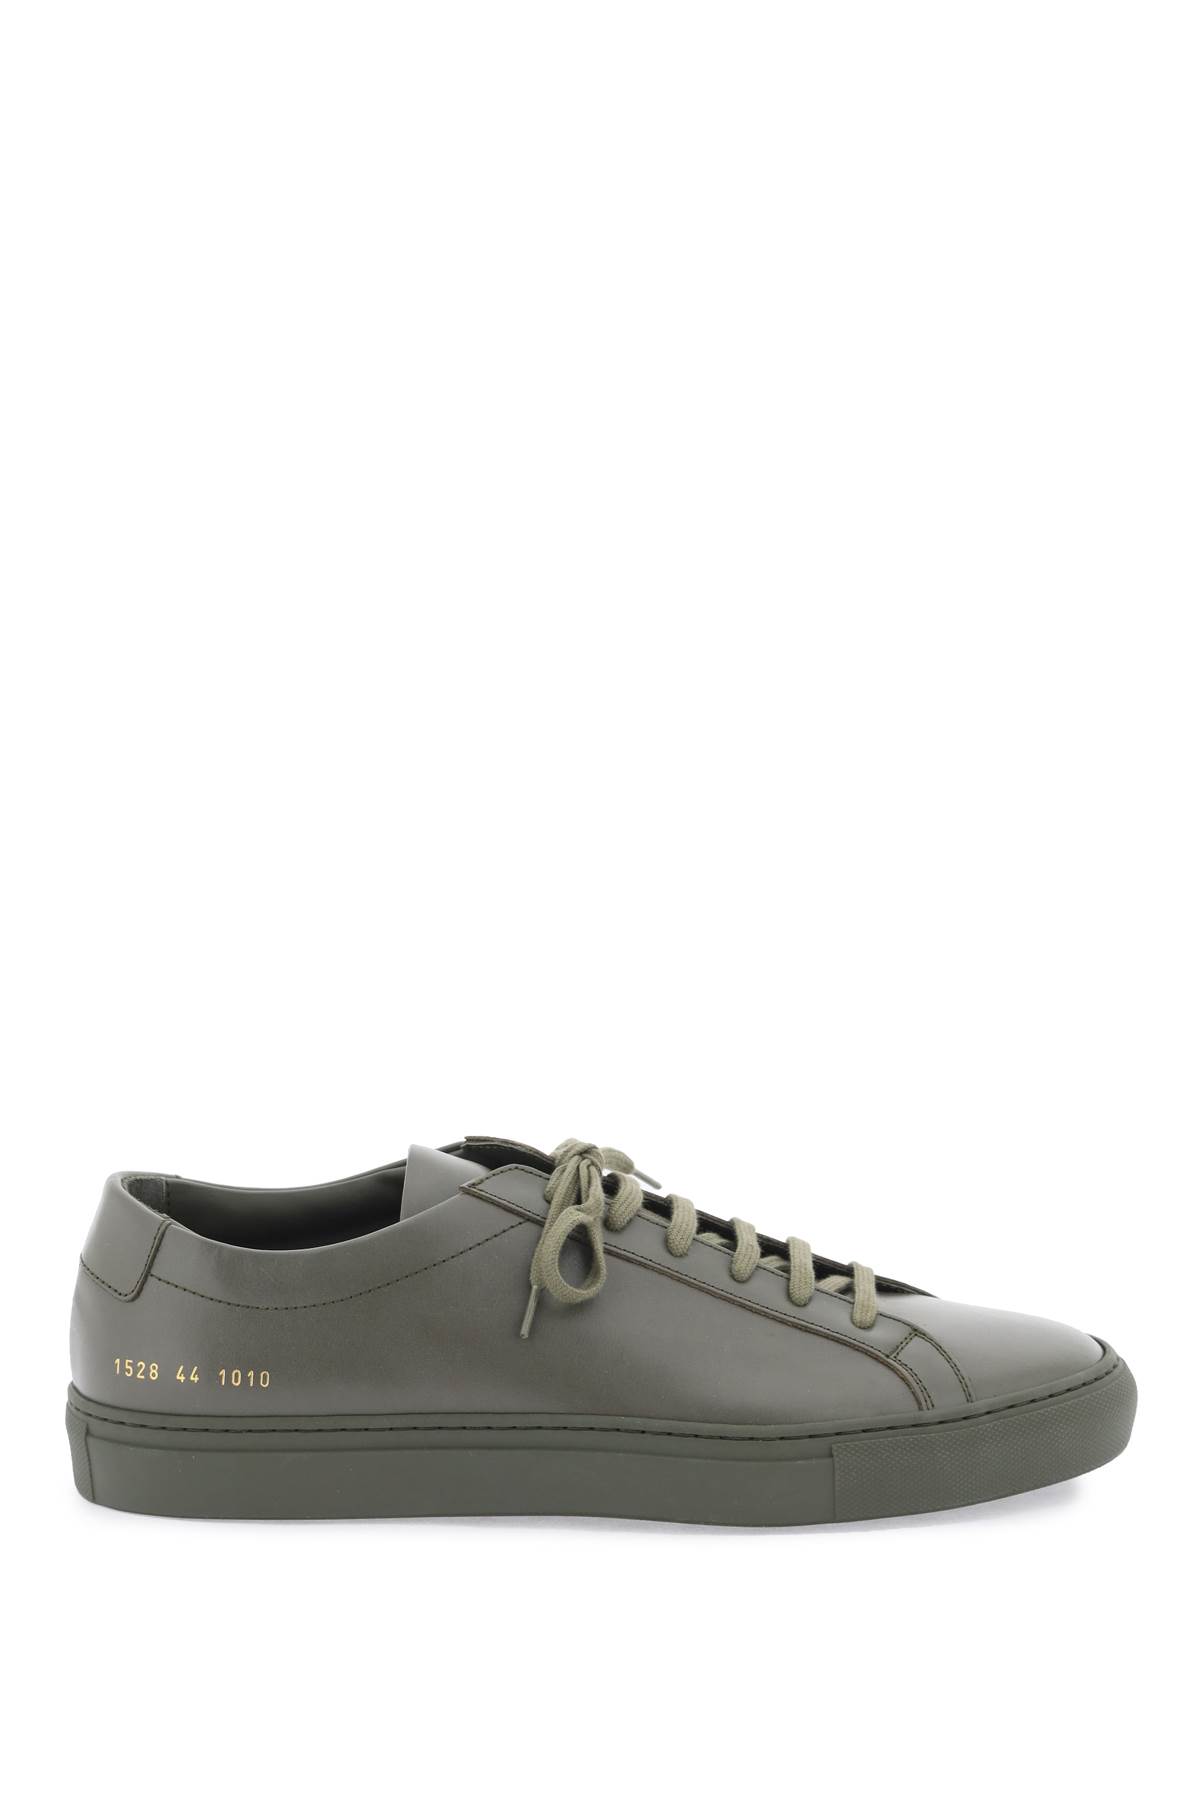 COMMON PROJECTS ORIGINAL ACHILLES LOW SNEAKERS